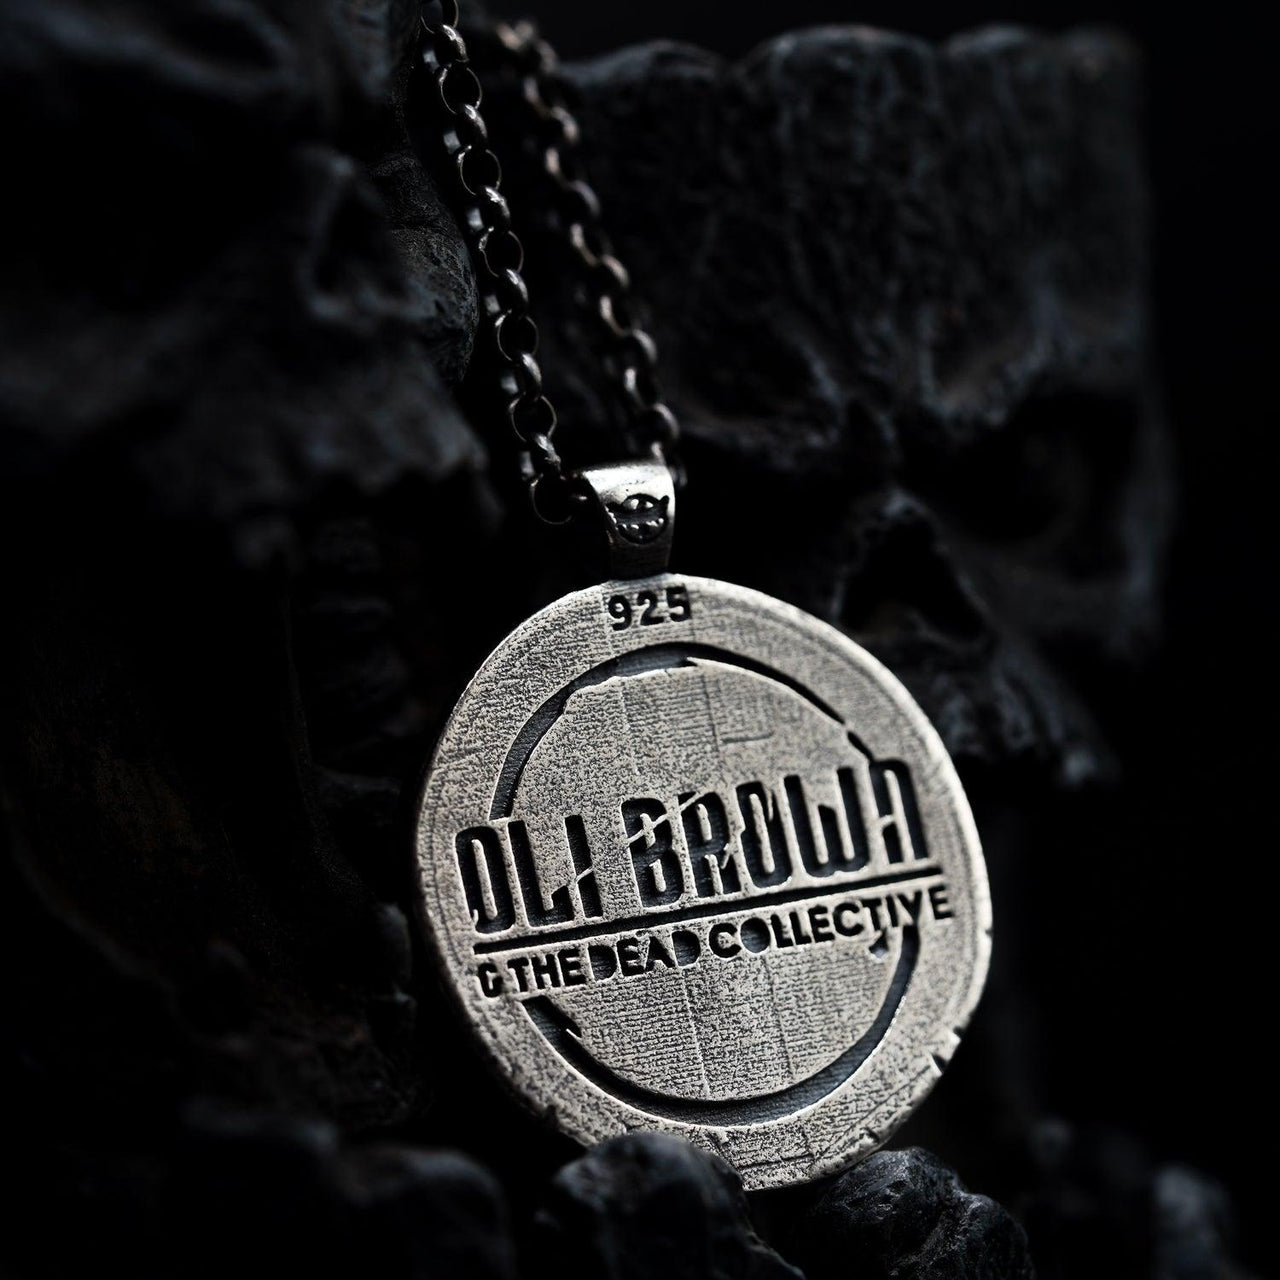 Oli Brown & The Dead Collective Pendant in Sterling Silver by Black Feather Design